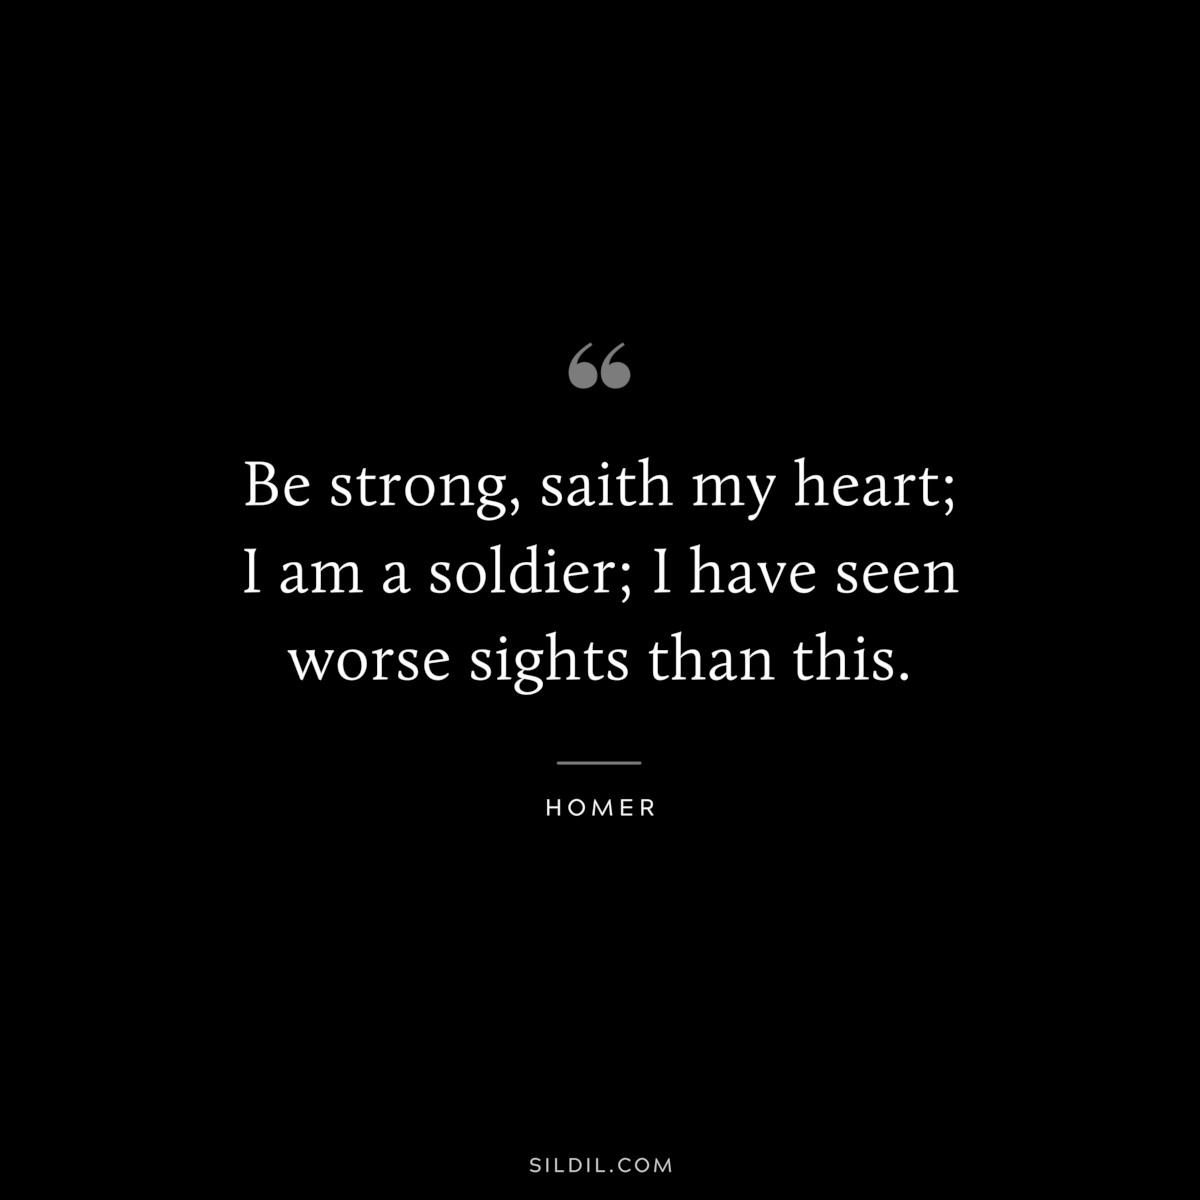 Be strong, saith my heart; I am a soldier; I have seen worse sights than this. ― Homer